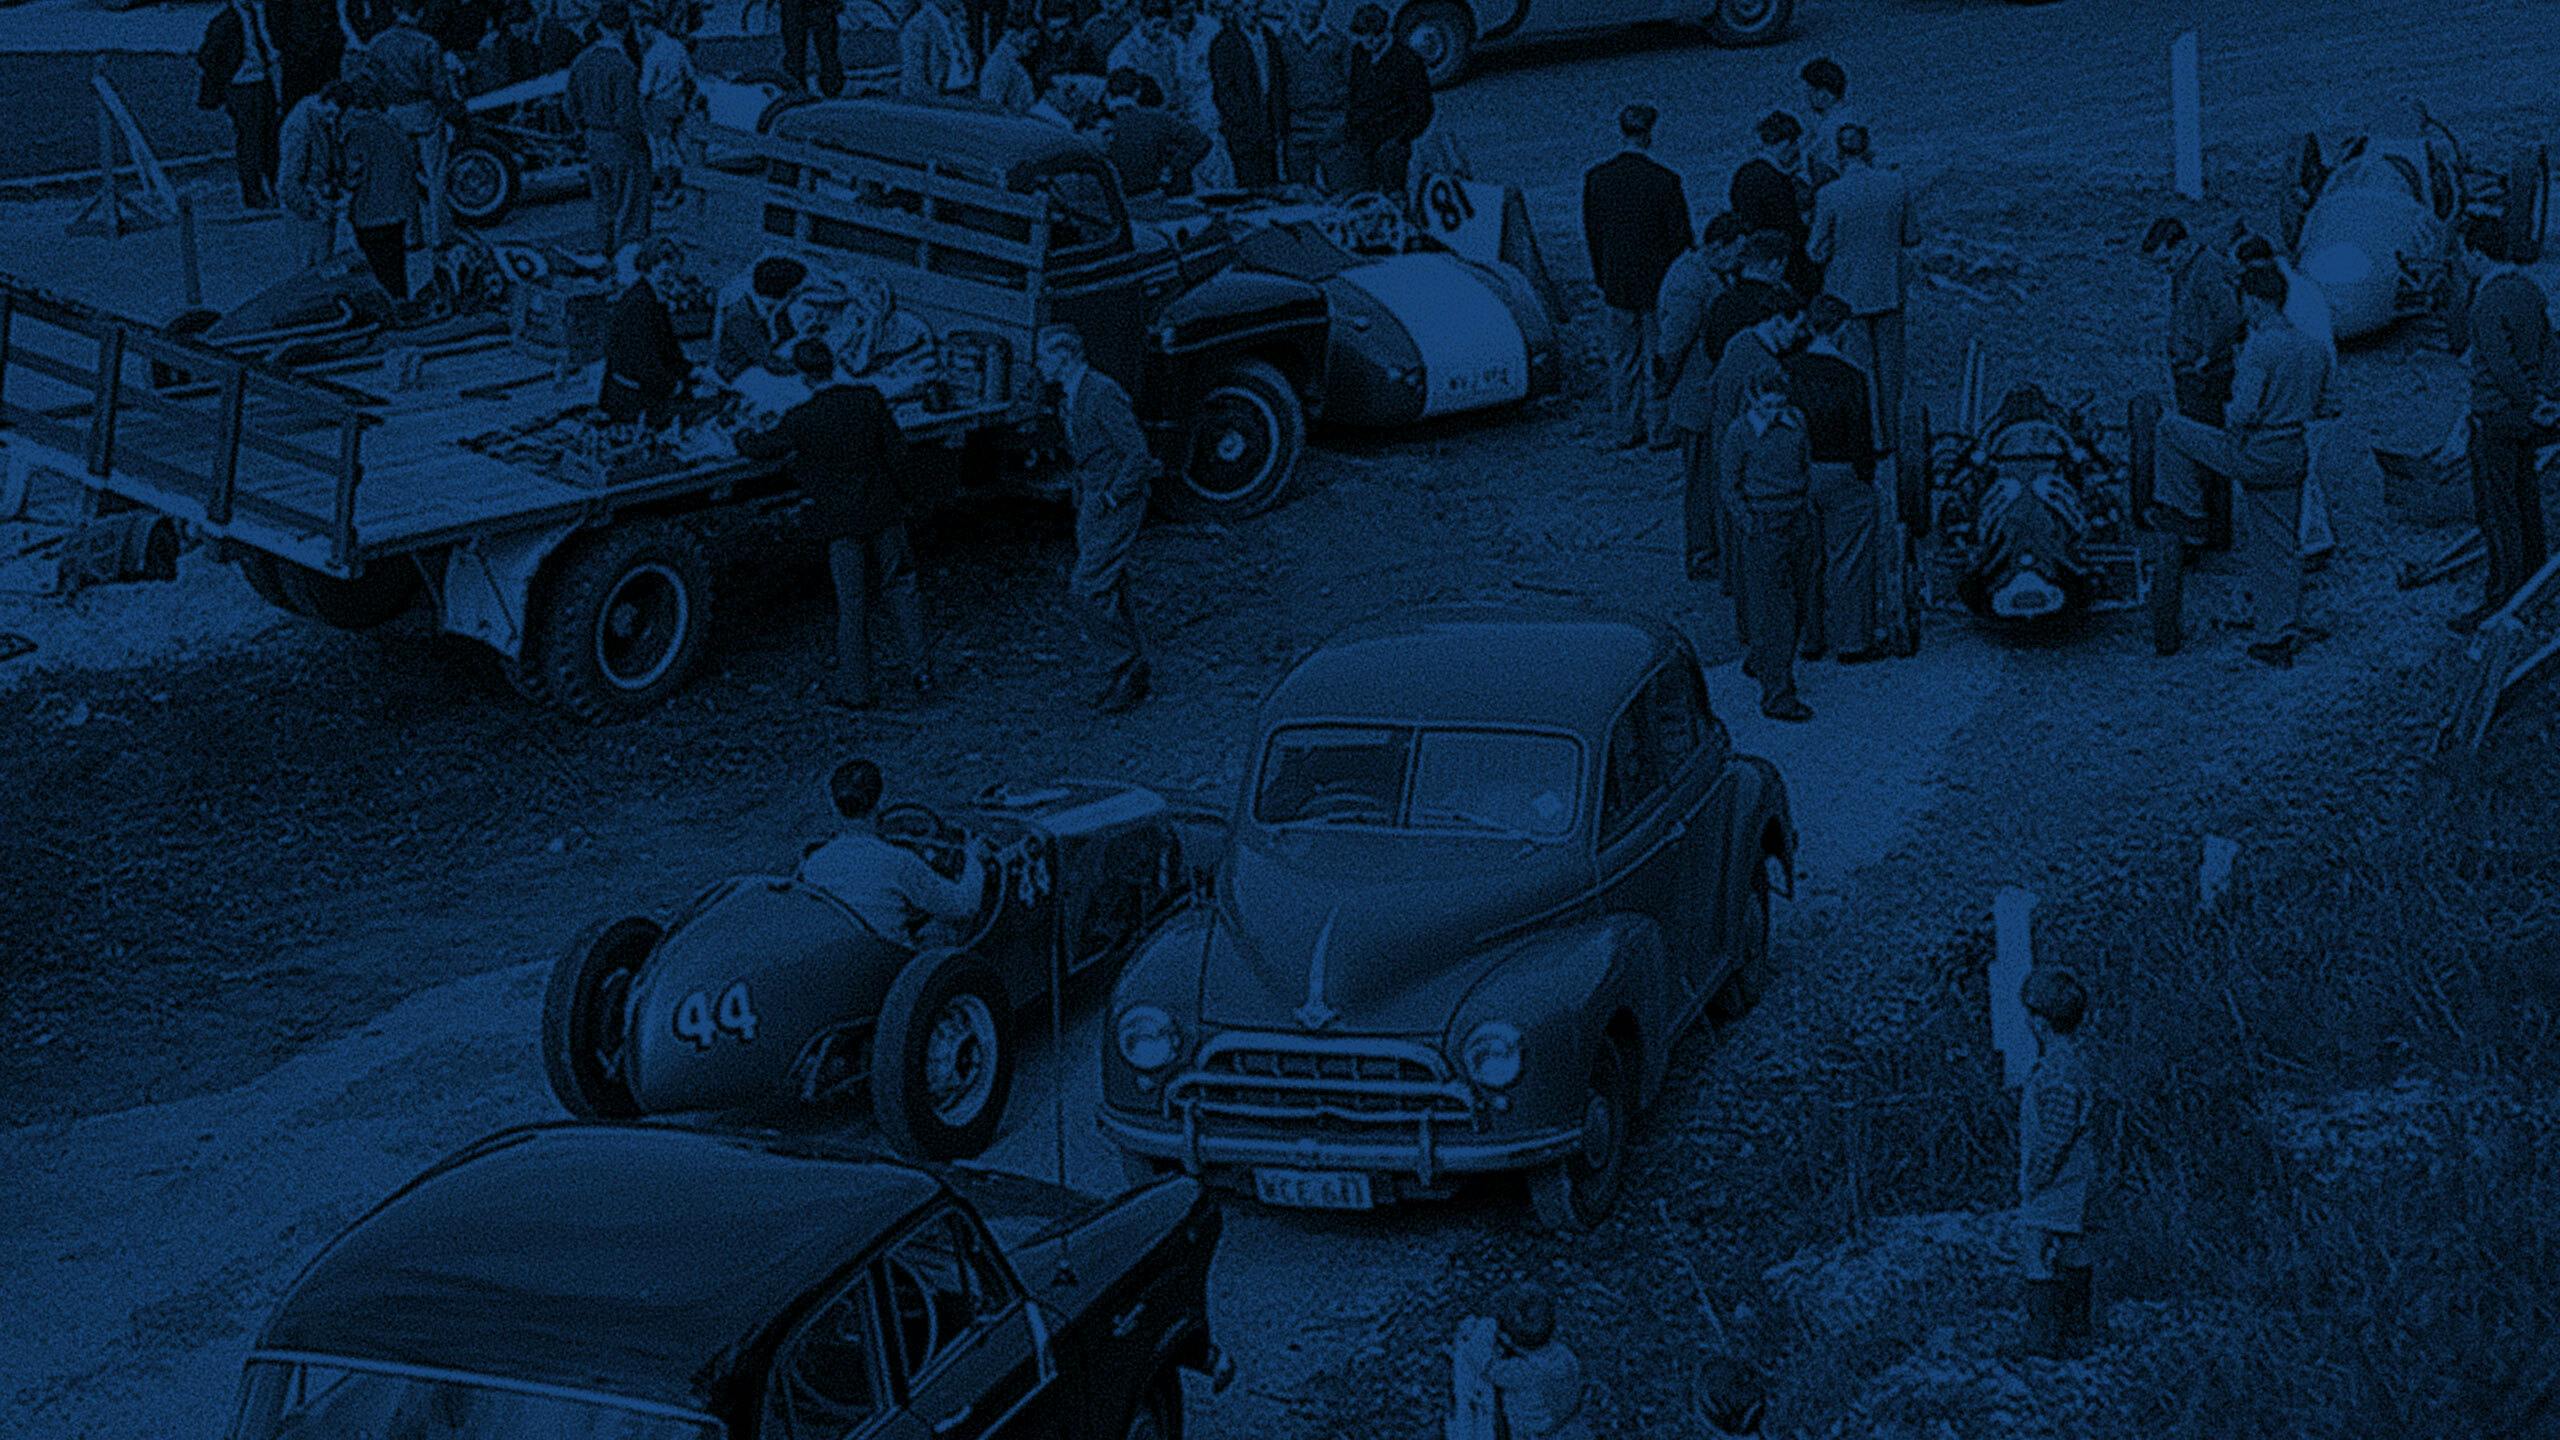 Vintage image with cars and people meeting